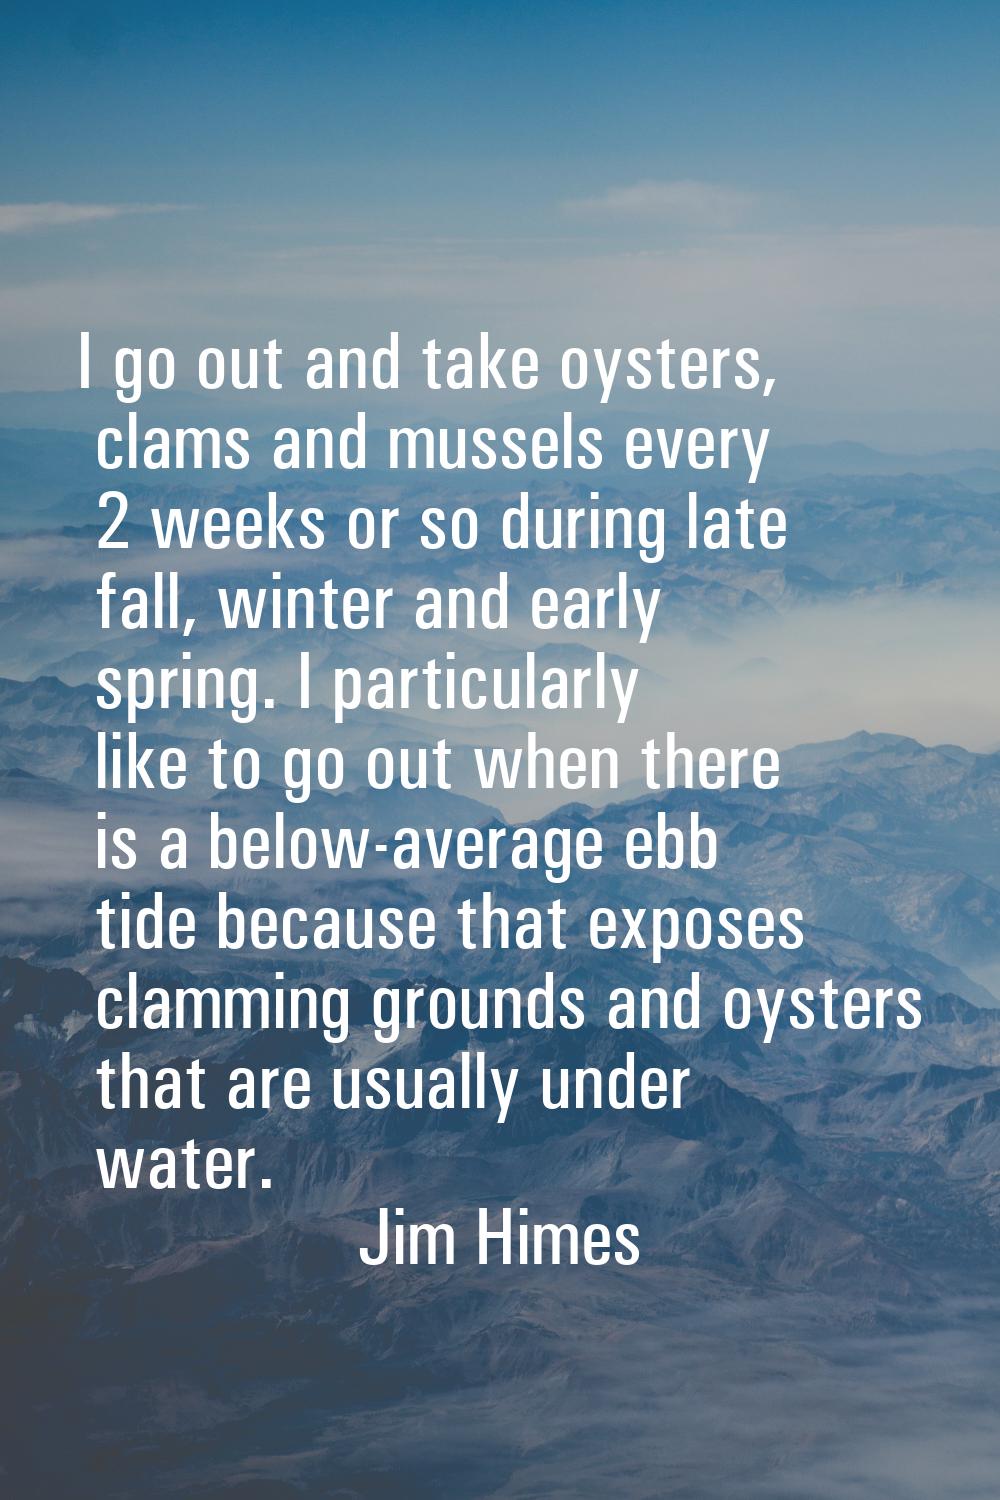 I go out and take oysters, clams and mussels every 2 weeks or so during late fall, winter and early